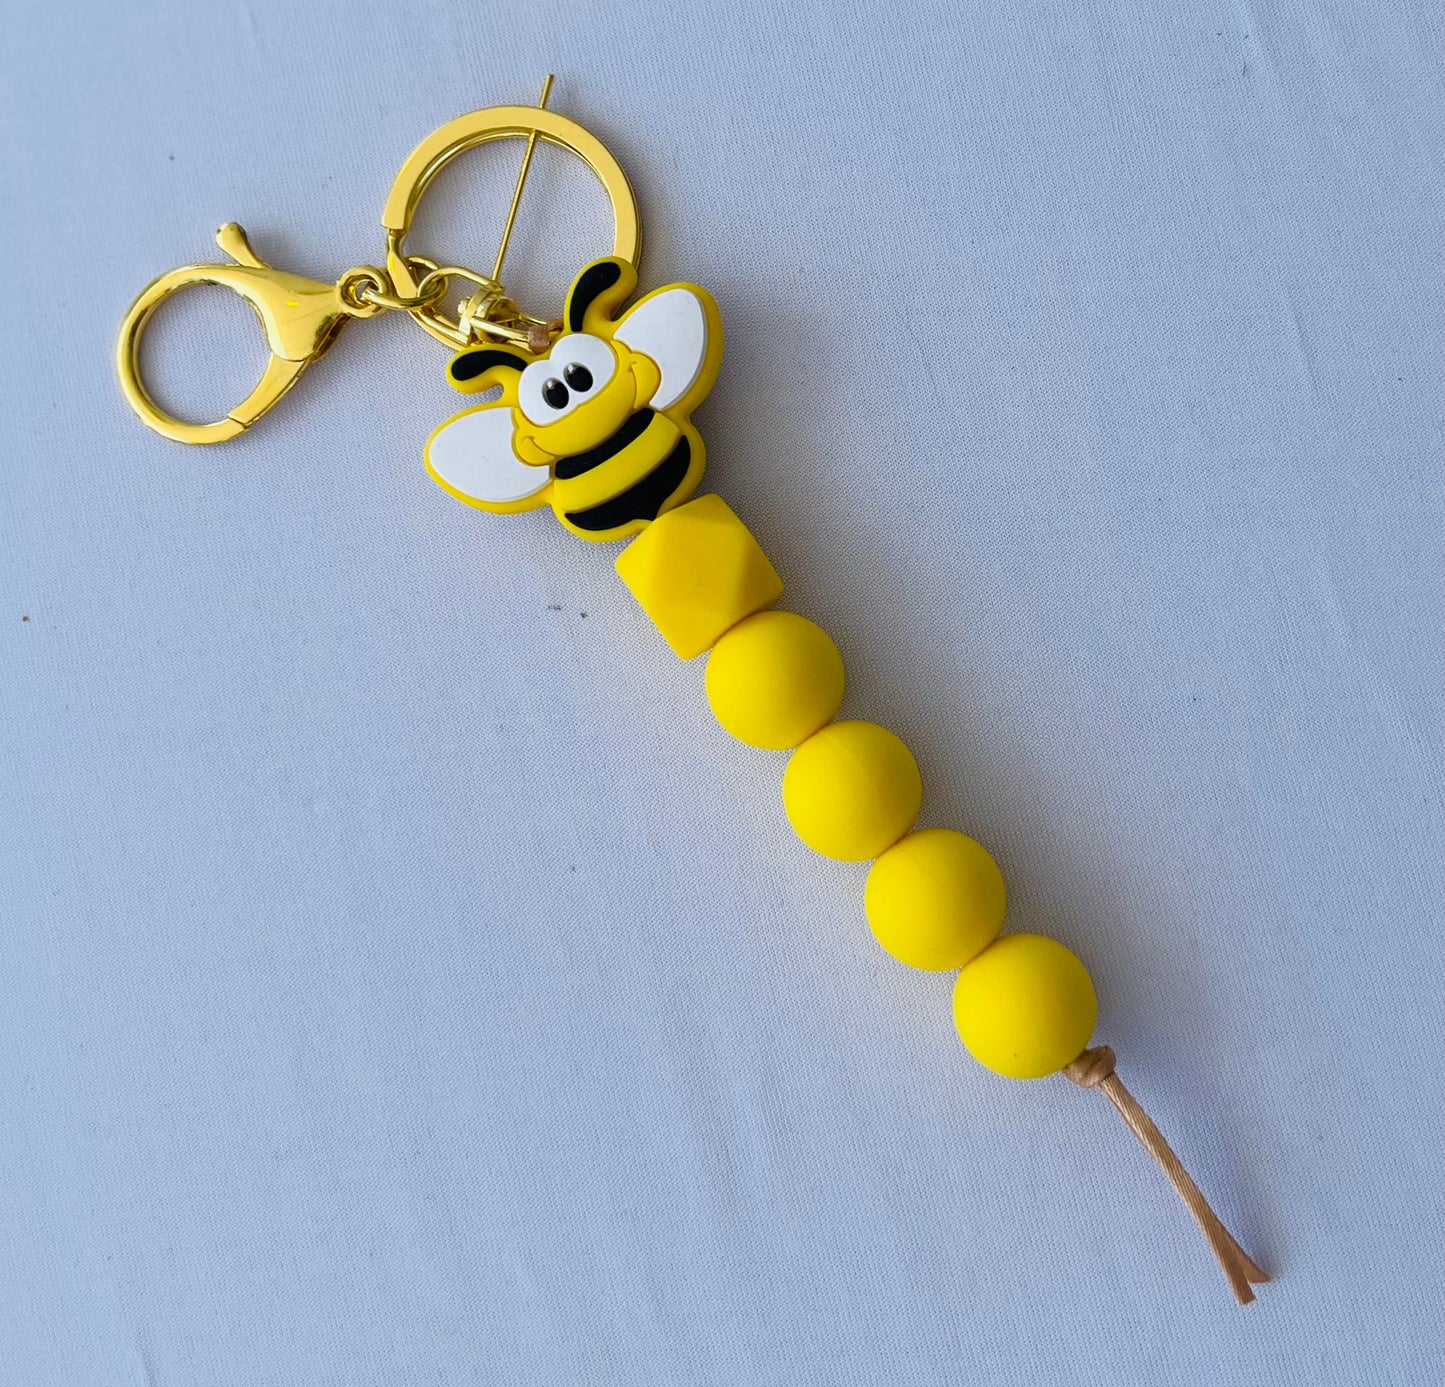 Handmade Busy Bees Key Chains